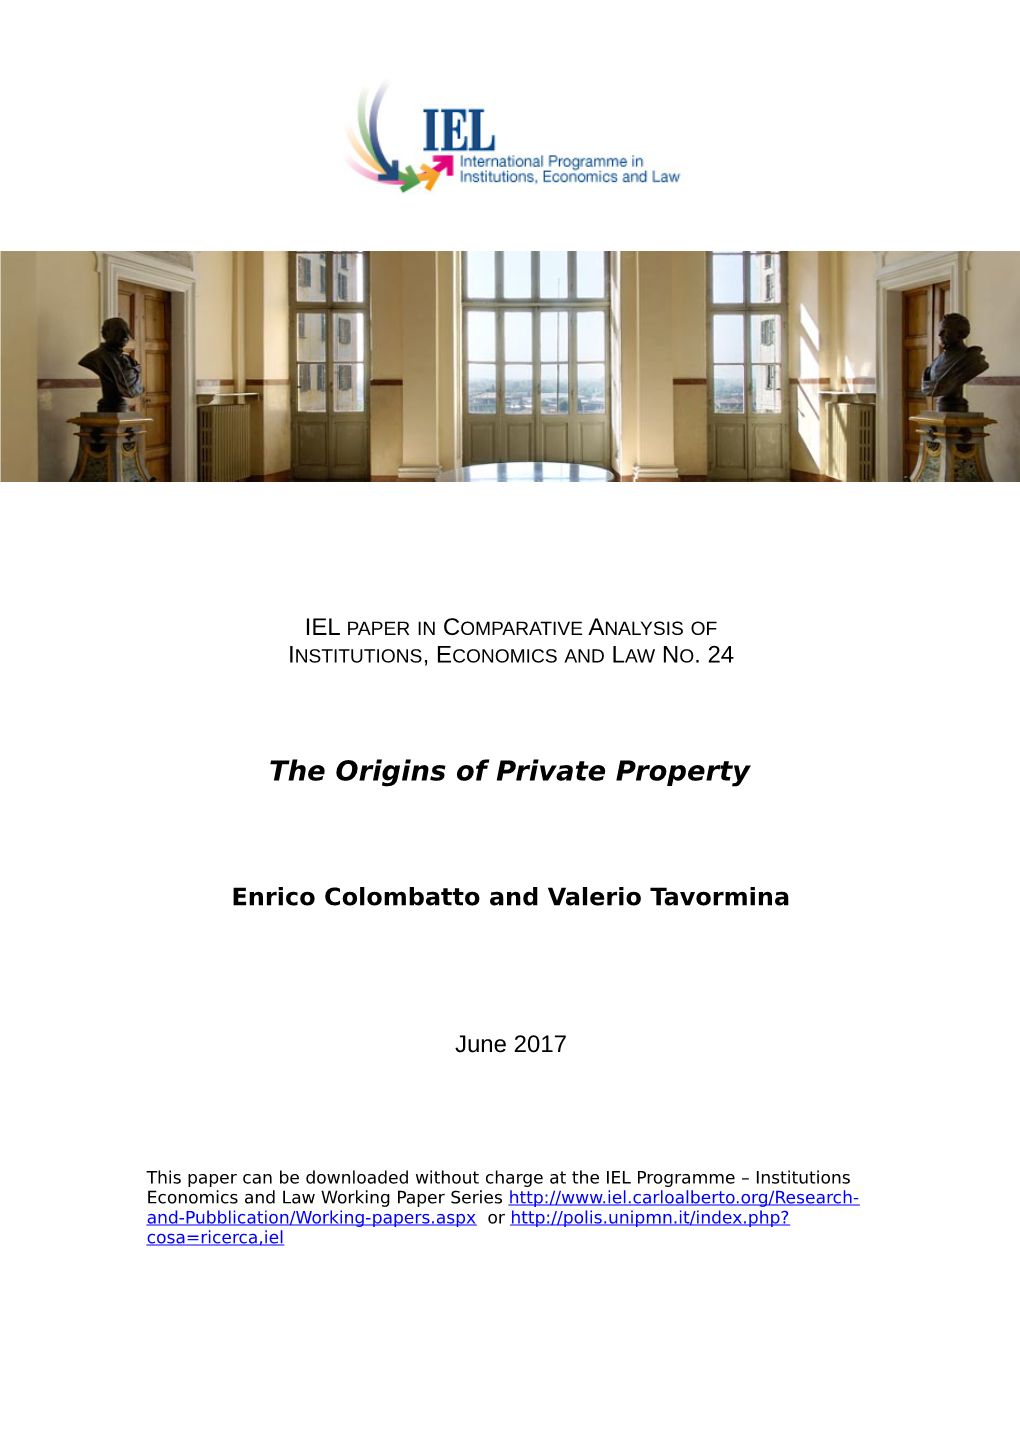 The Origins of Private Property